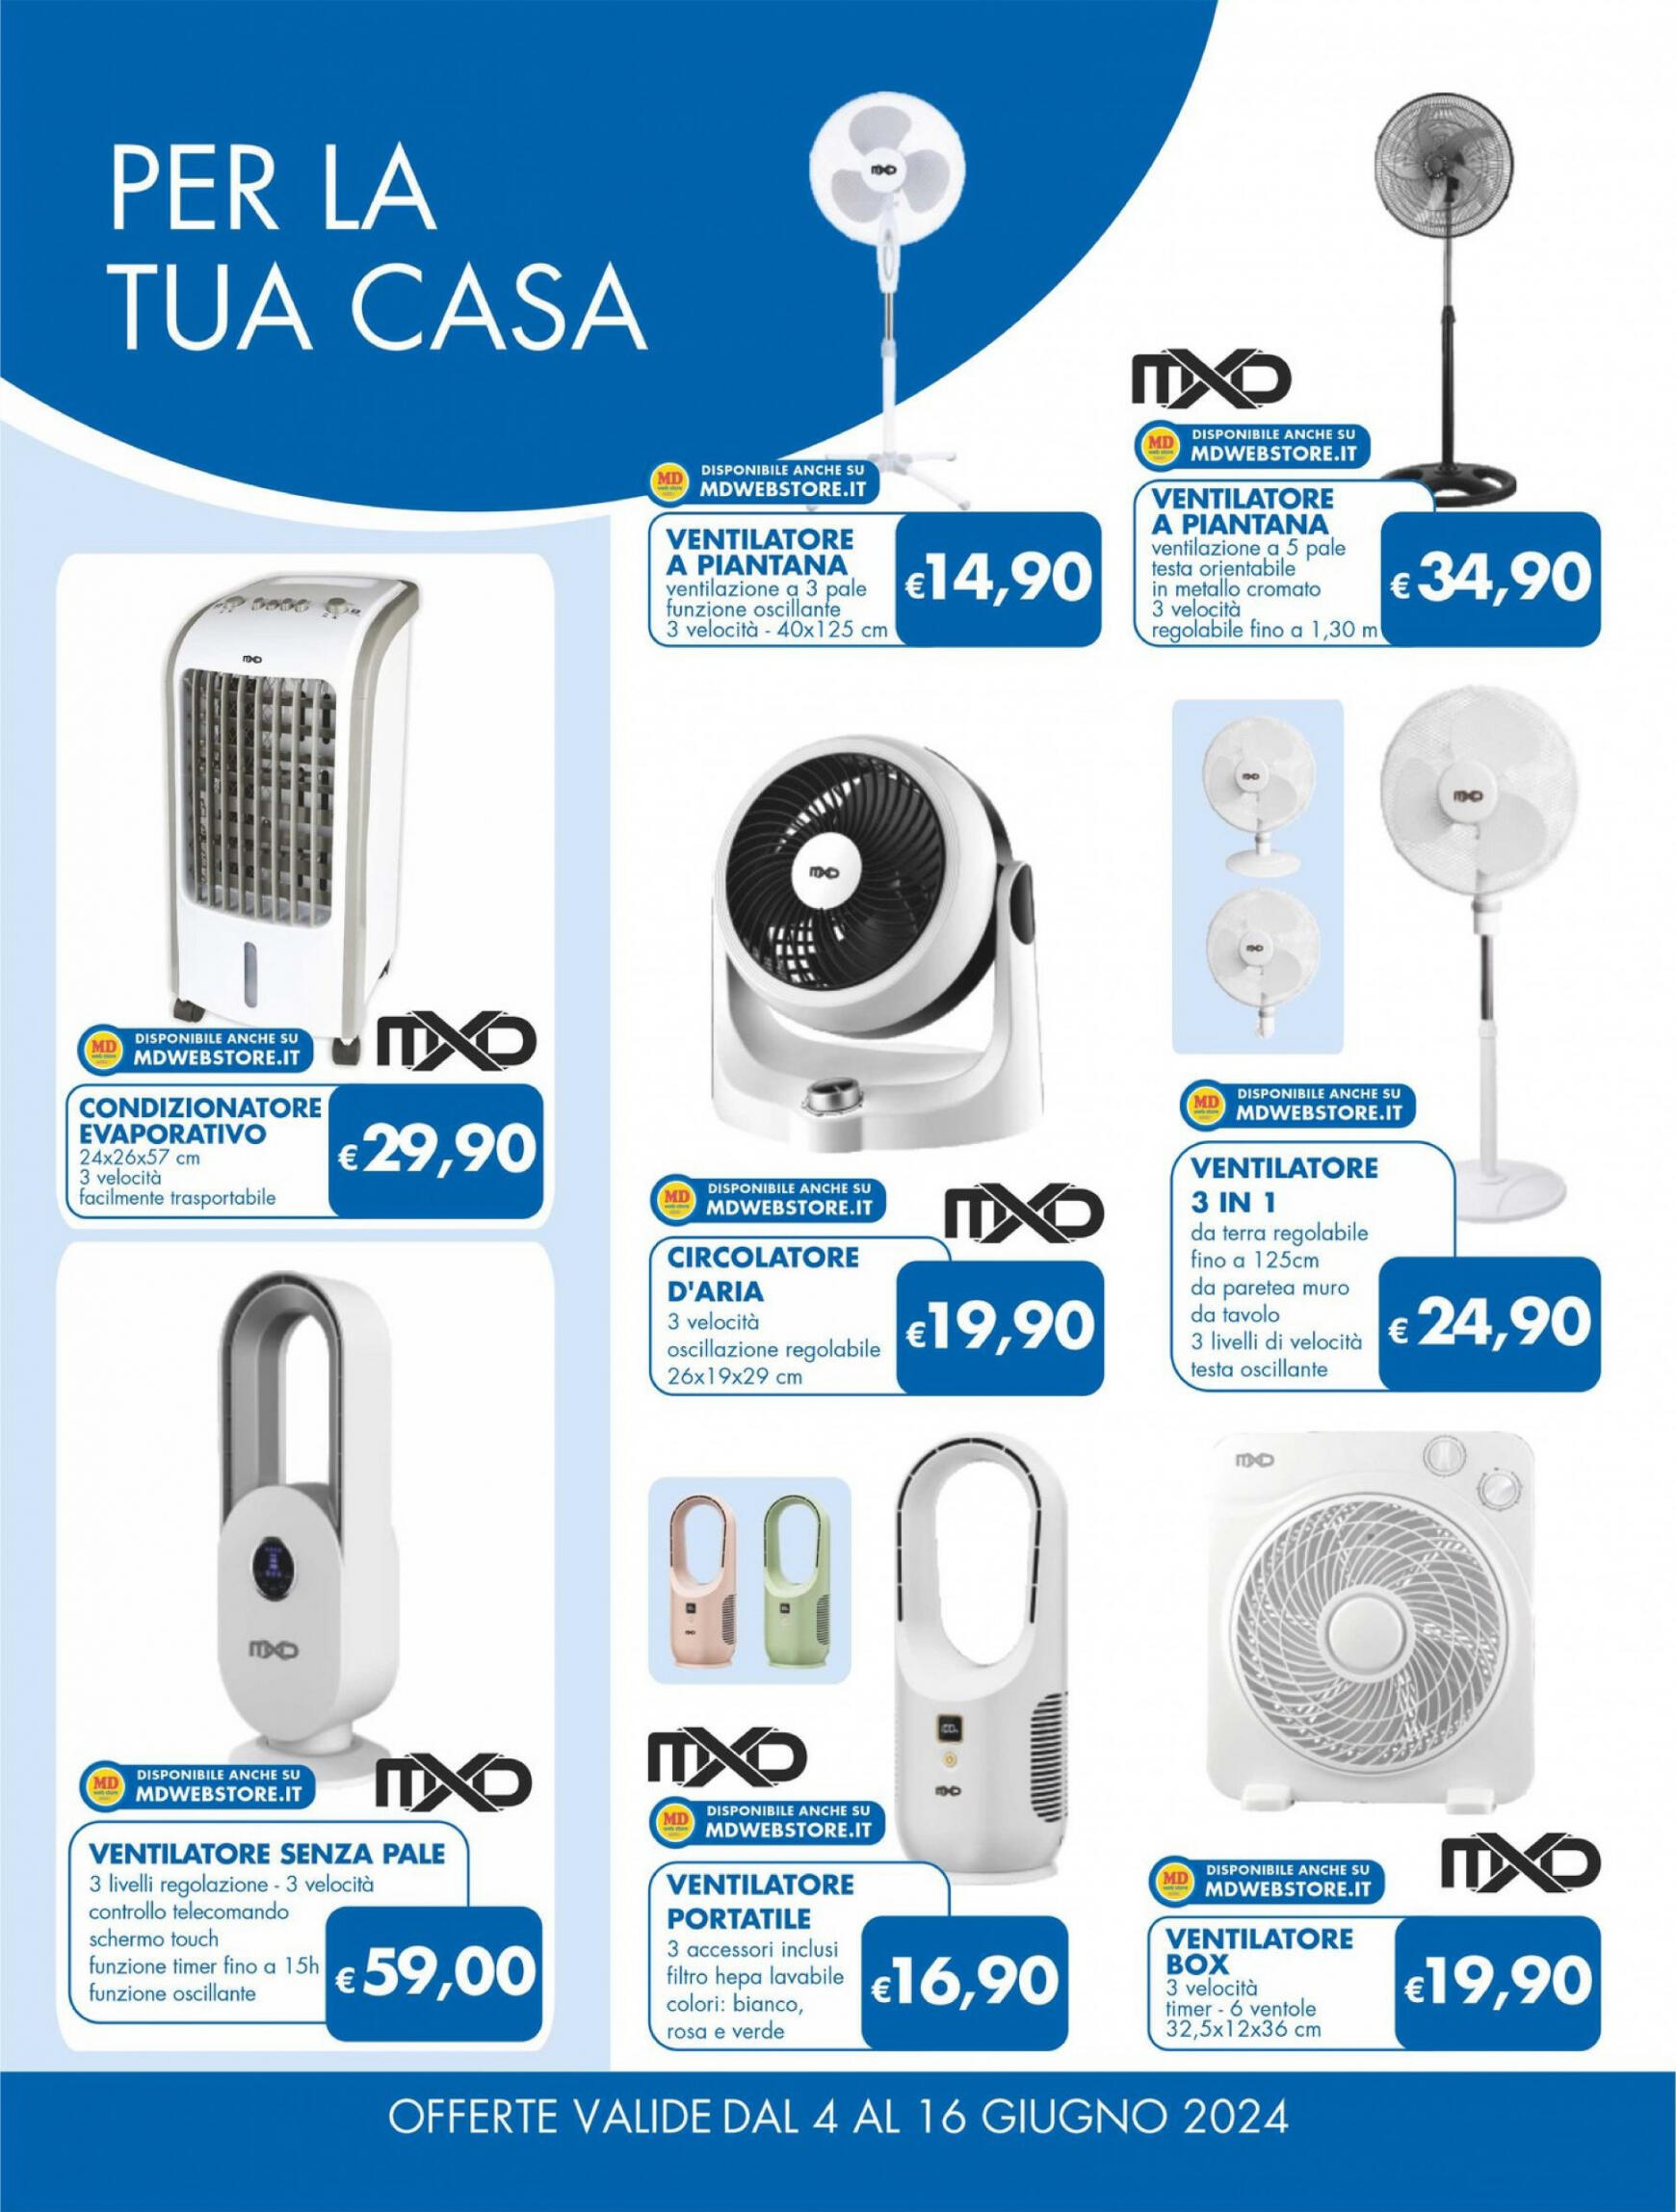 md-discount - Nuovo volantino MD 04.06. - 16.06. - page: 27